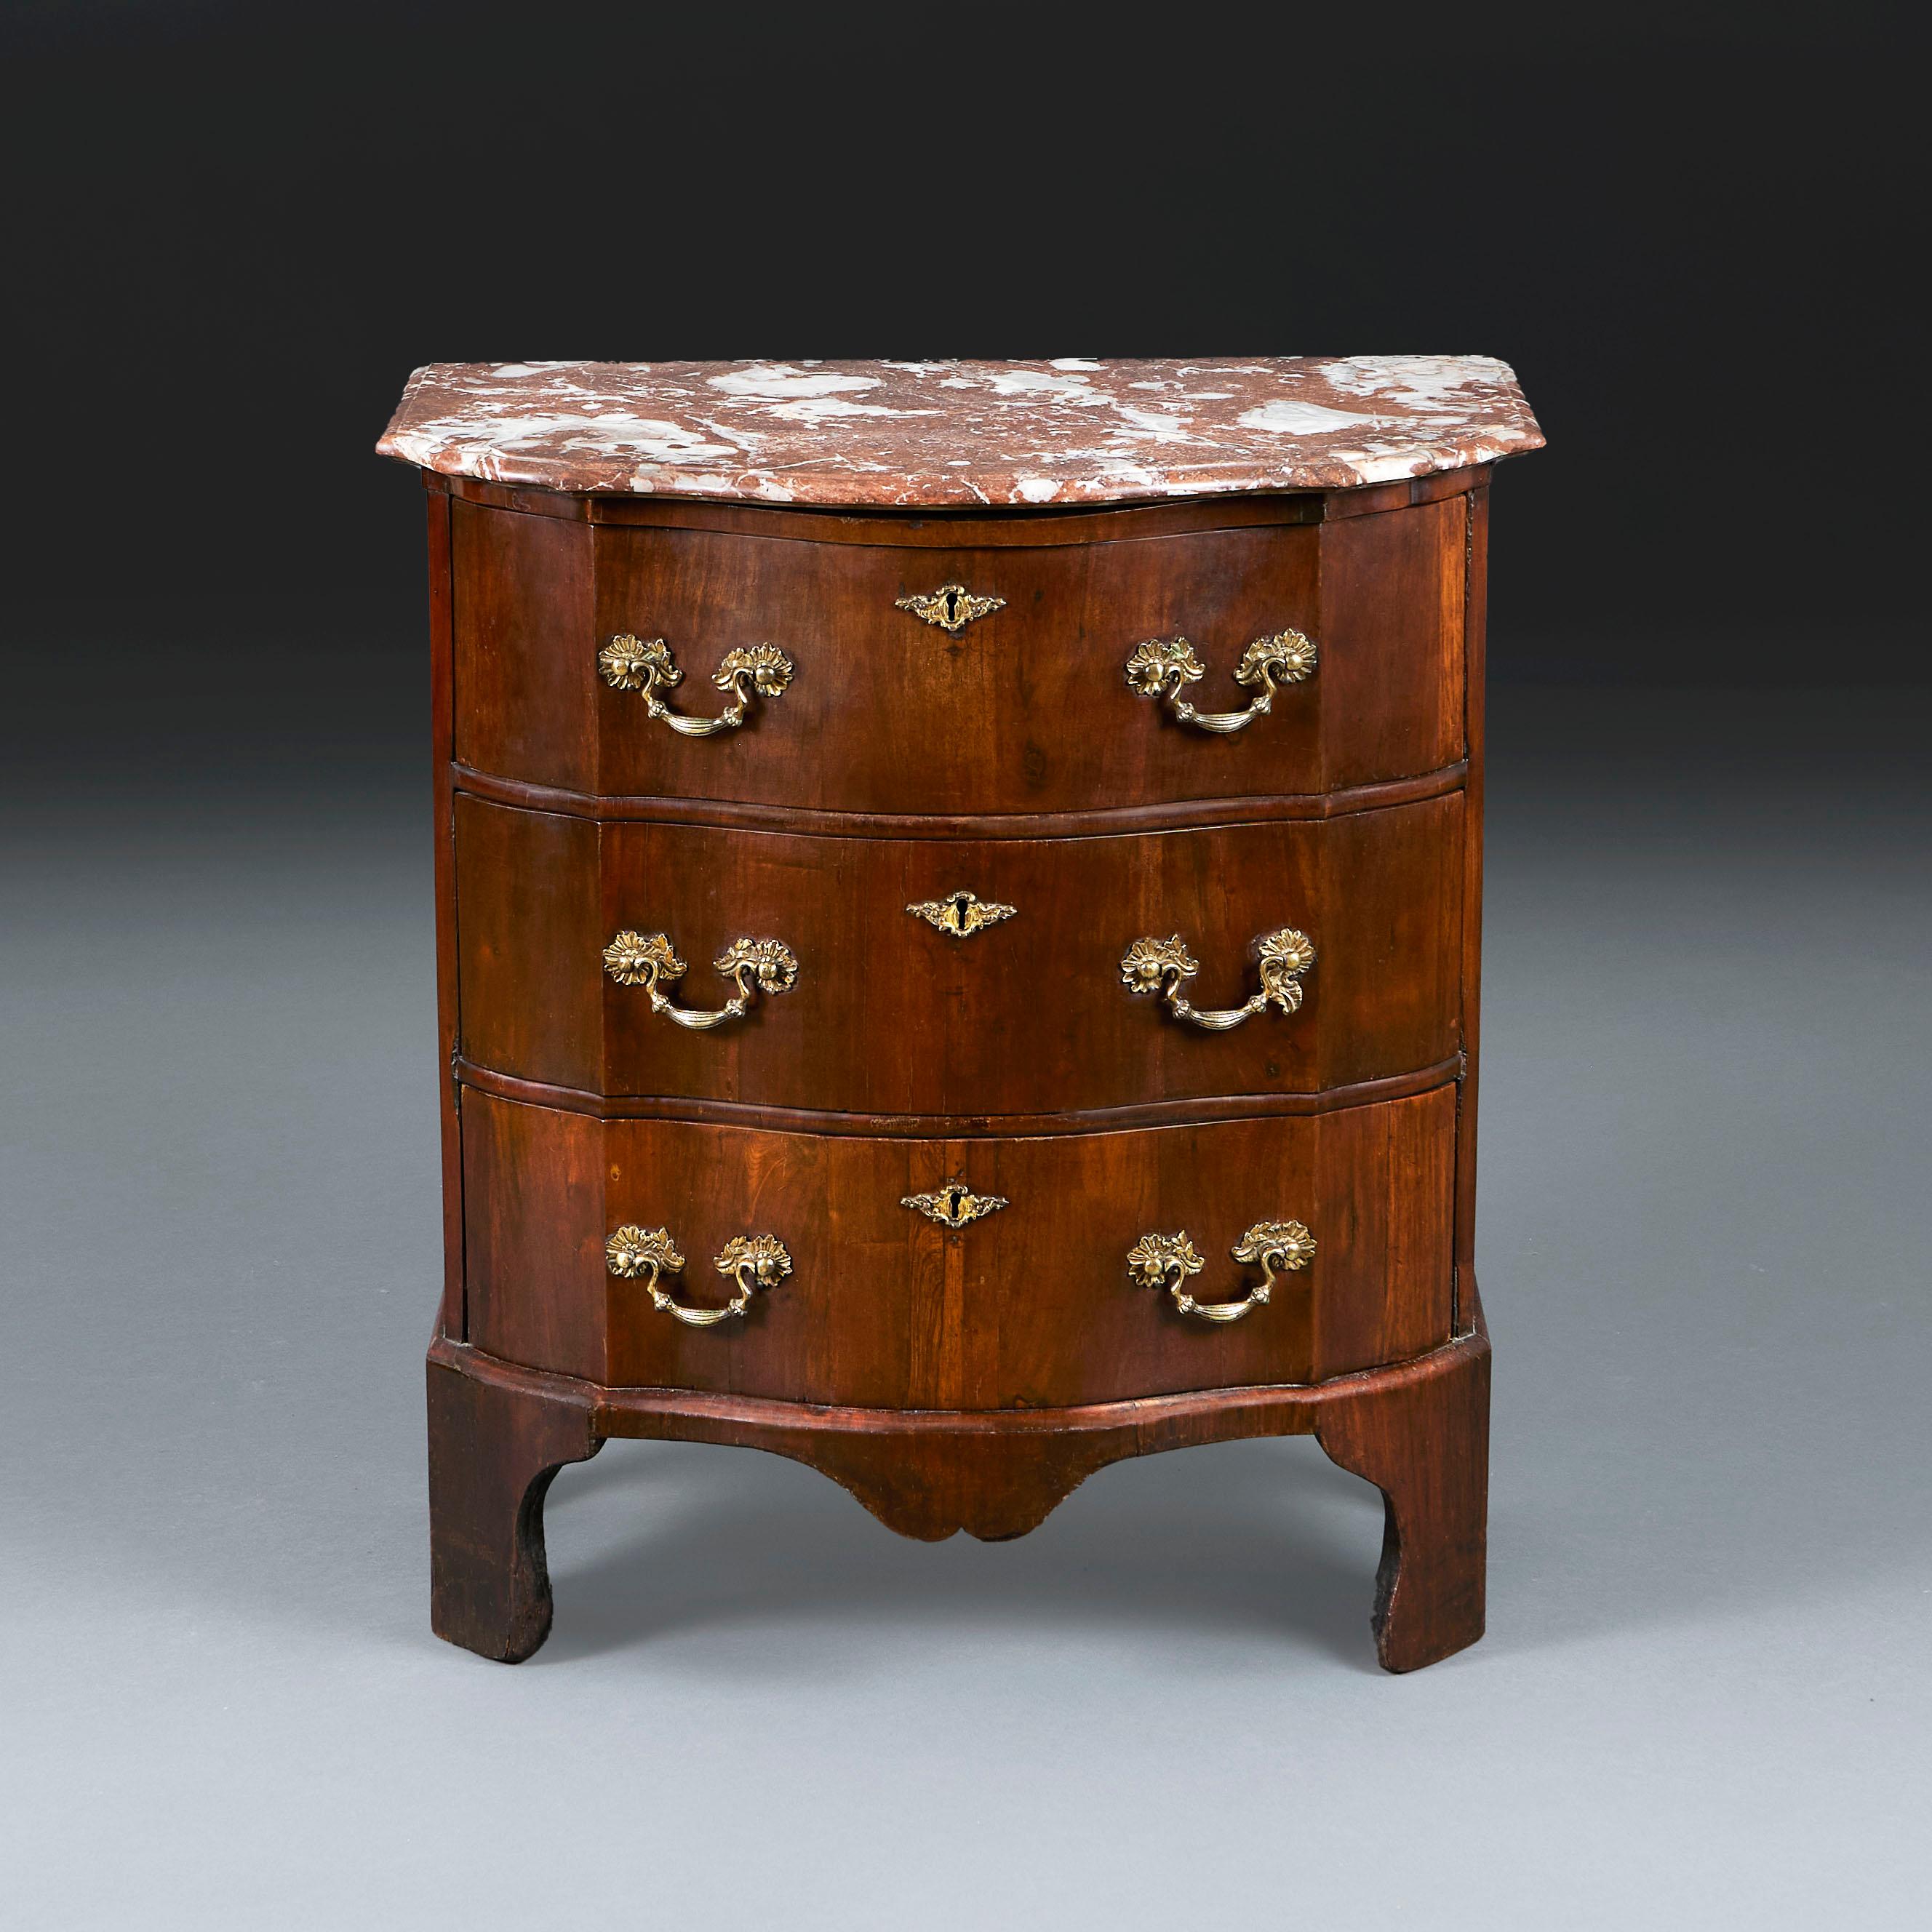 France, circa 1750

A mid eighteenth century bedside commode with serpentine front, opening with three drawers, retaining the original red marble top, and all supported on bracket feet.

Height 76.00cm
Width 70.00cm
Depth 41.00cm